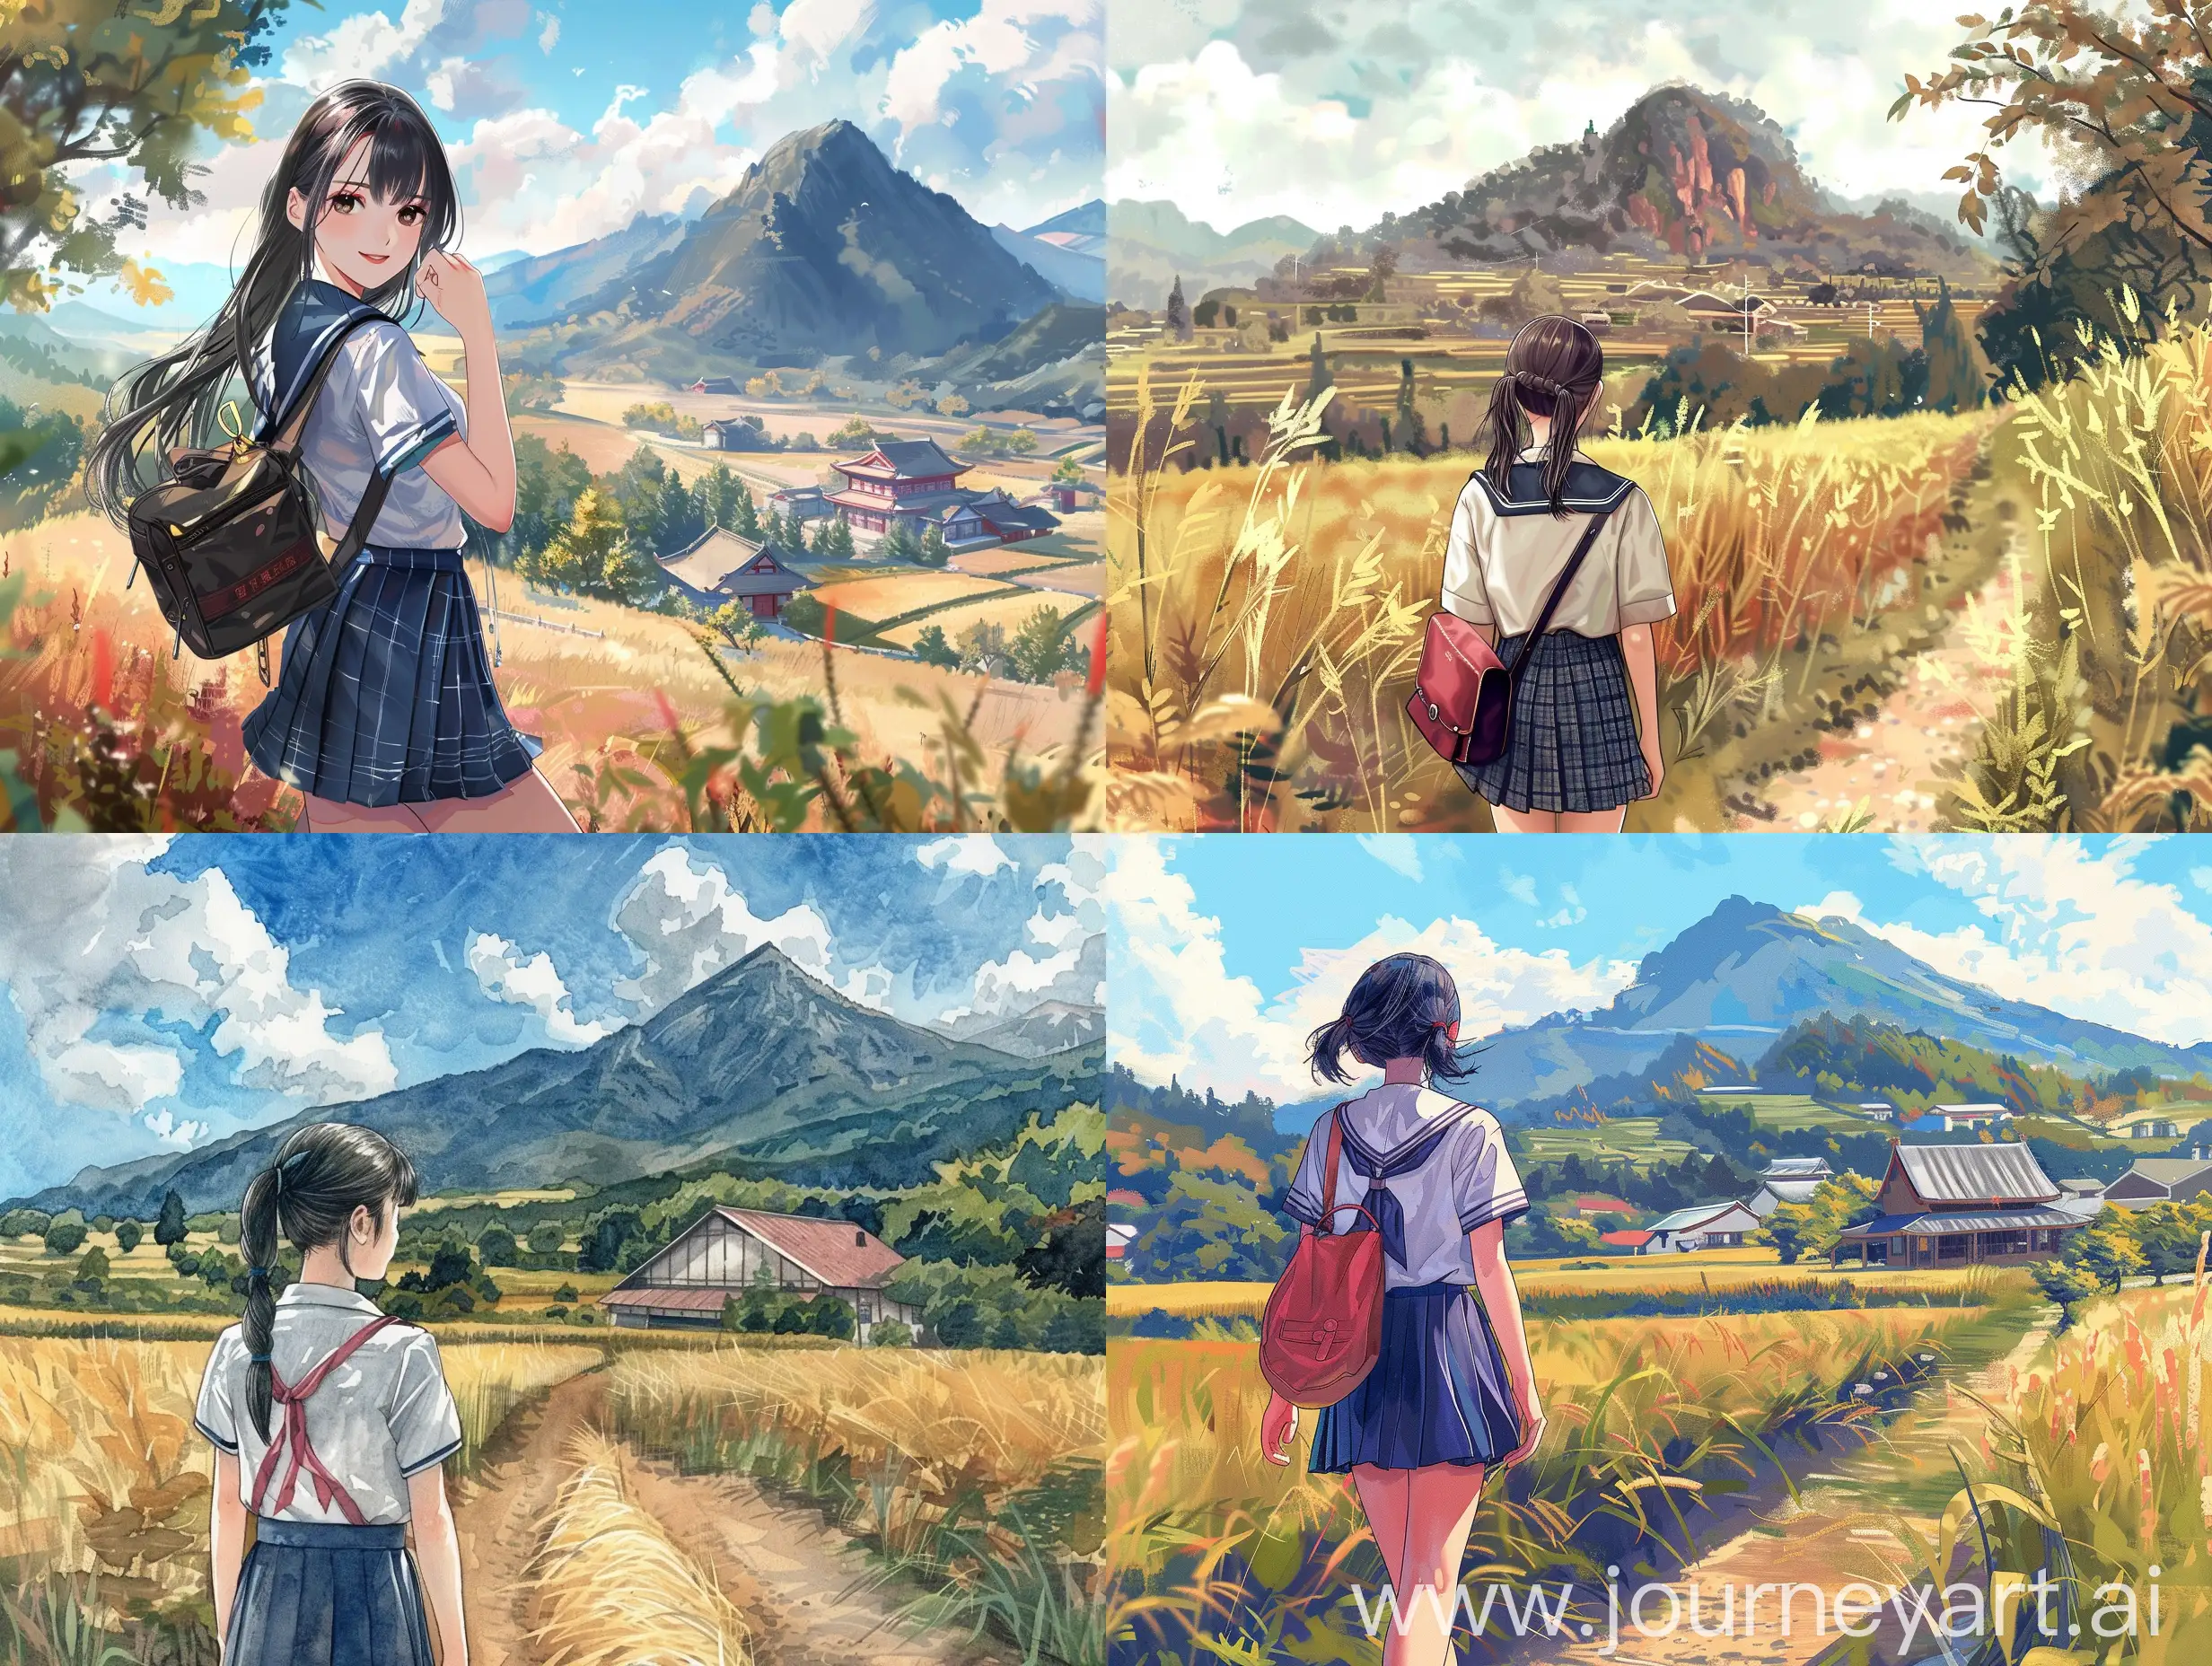 Draw a Chinese girl in a high school student's uniform in a beautiful rural field with her back to a mountain